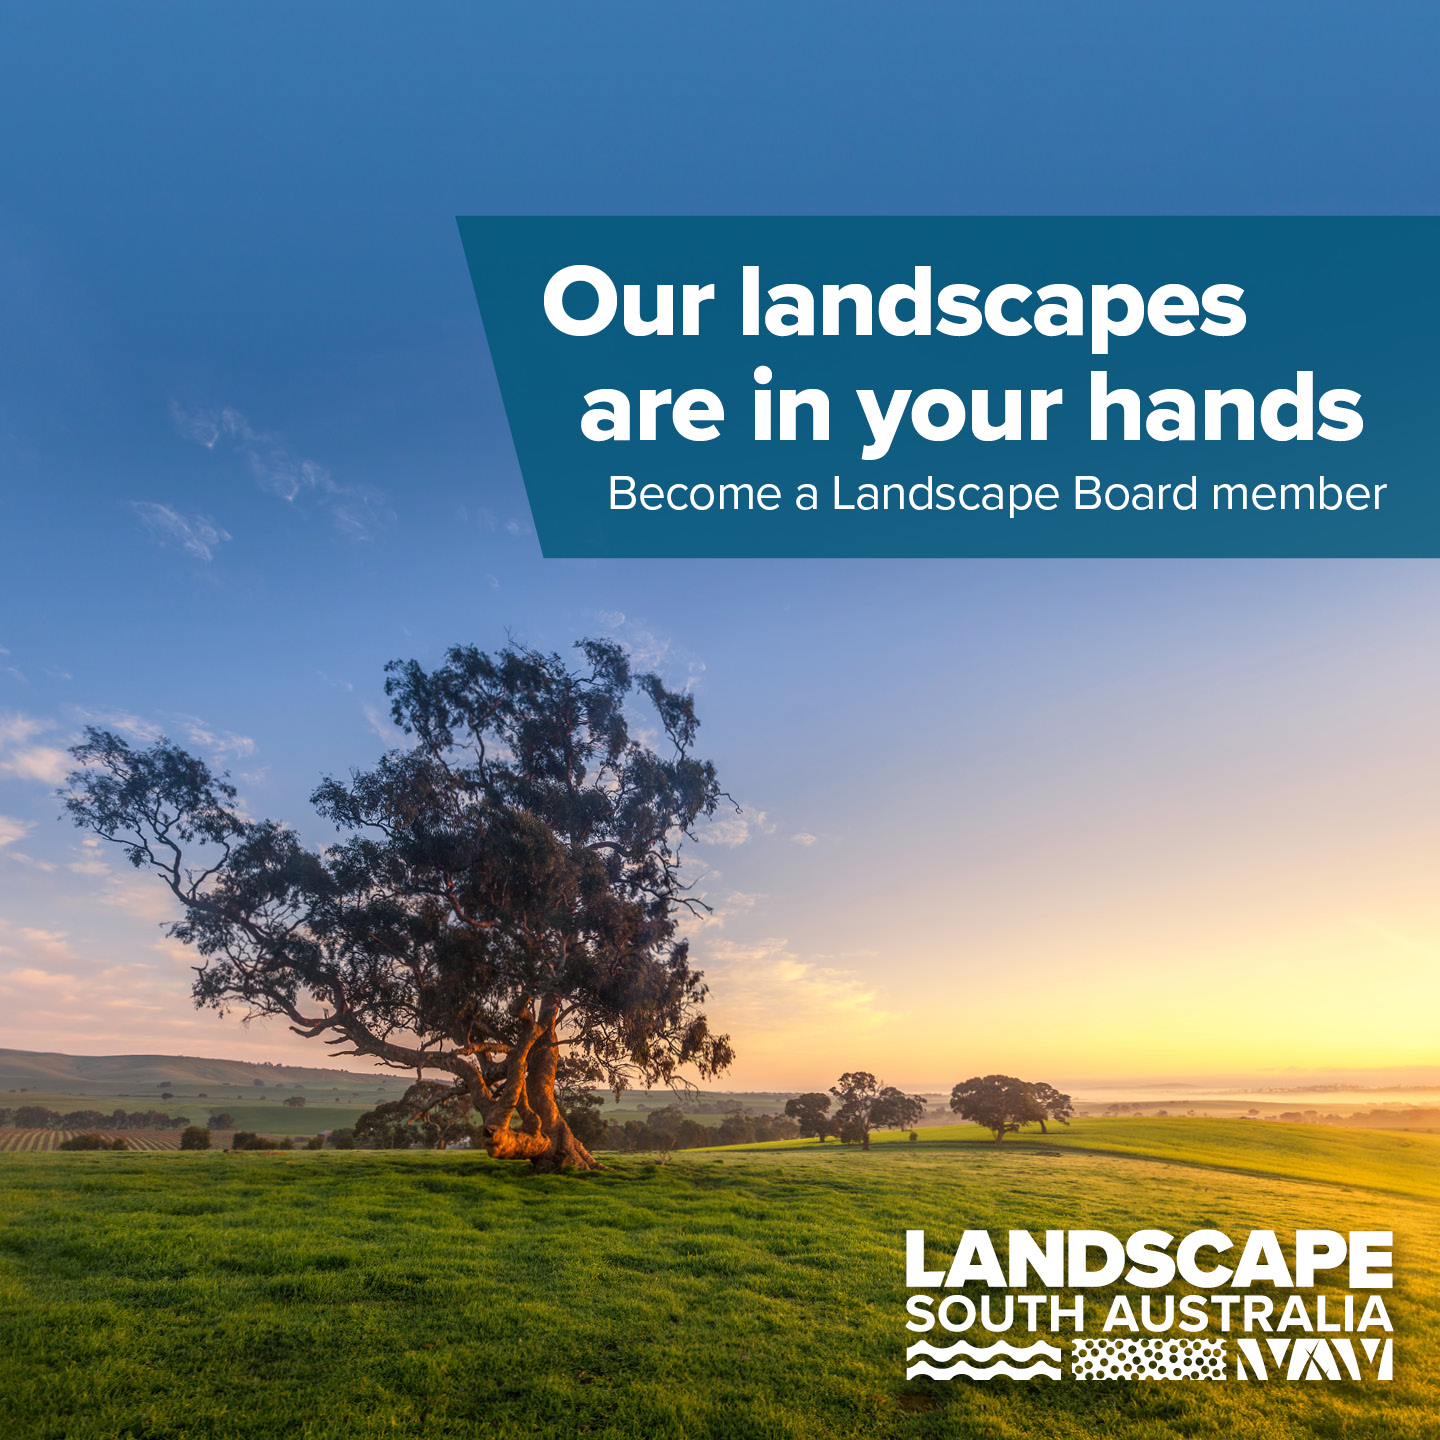 NRMjobs - 20005023 - Nominate to be a member of a new Landscape Board (various positions)